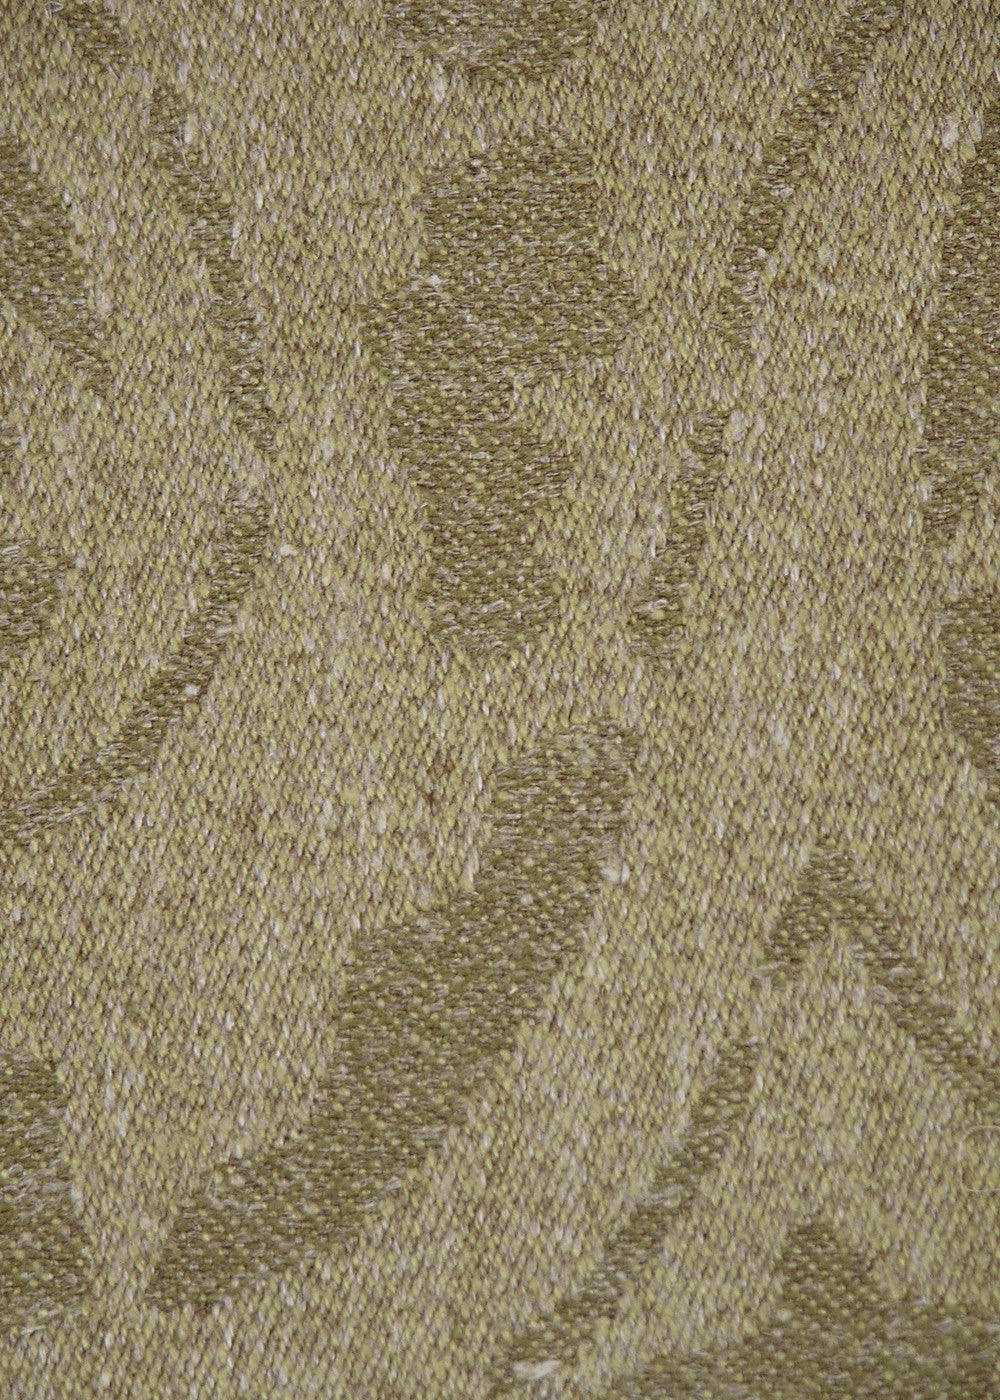 natural fabric with a woven large-scale damask pattern